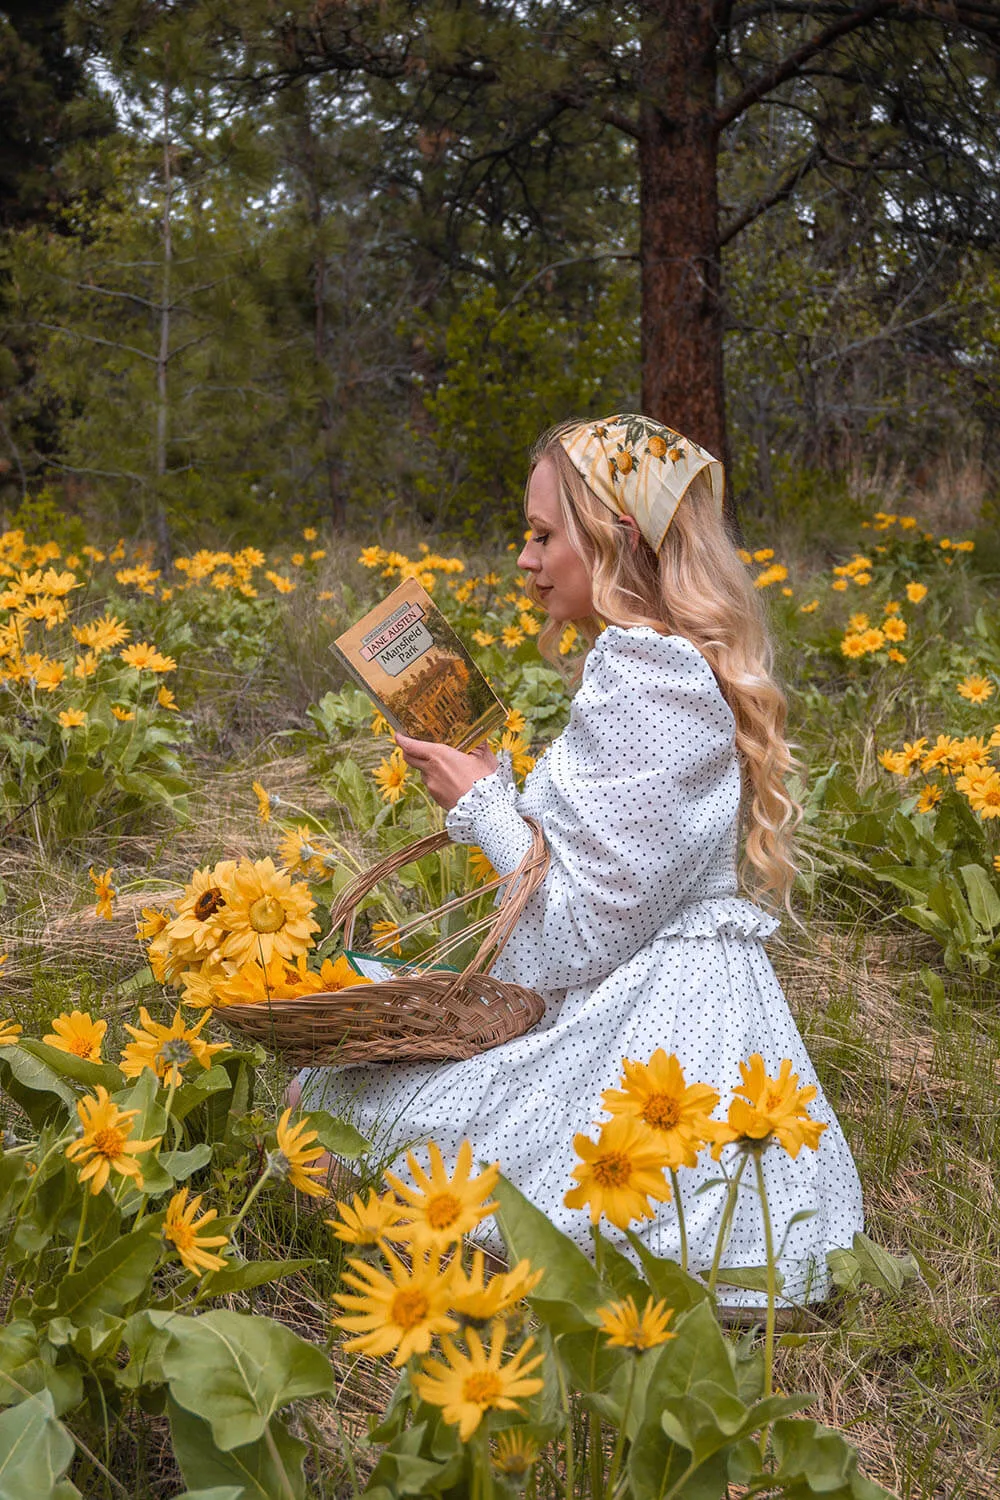 Looking for some unique and creative spring photoshoot ideas to elevate your instagram? Heres a list of 22 spring photography ideas that will help you achieve the spring aesthetic of your dreams. Whether you want to aim for destination photography, try your hand at shooting with props, or want some creative ideas, this post has all sorts of spring photography ideas to help you get some really fun seasonal spring photos for your instagram.